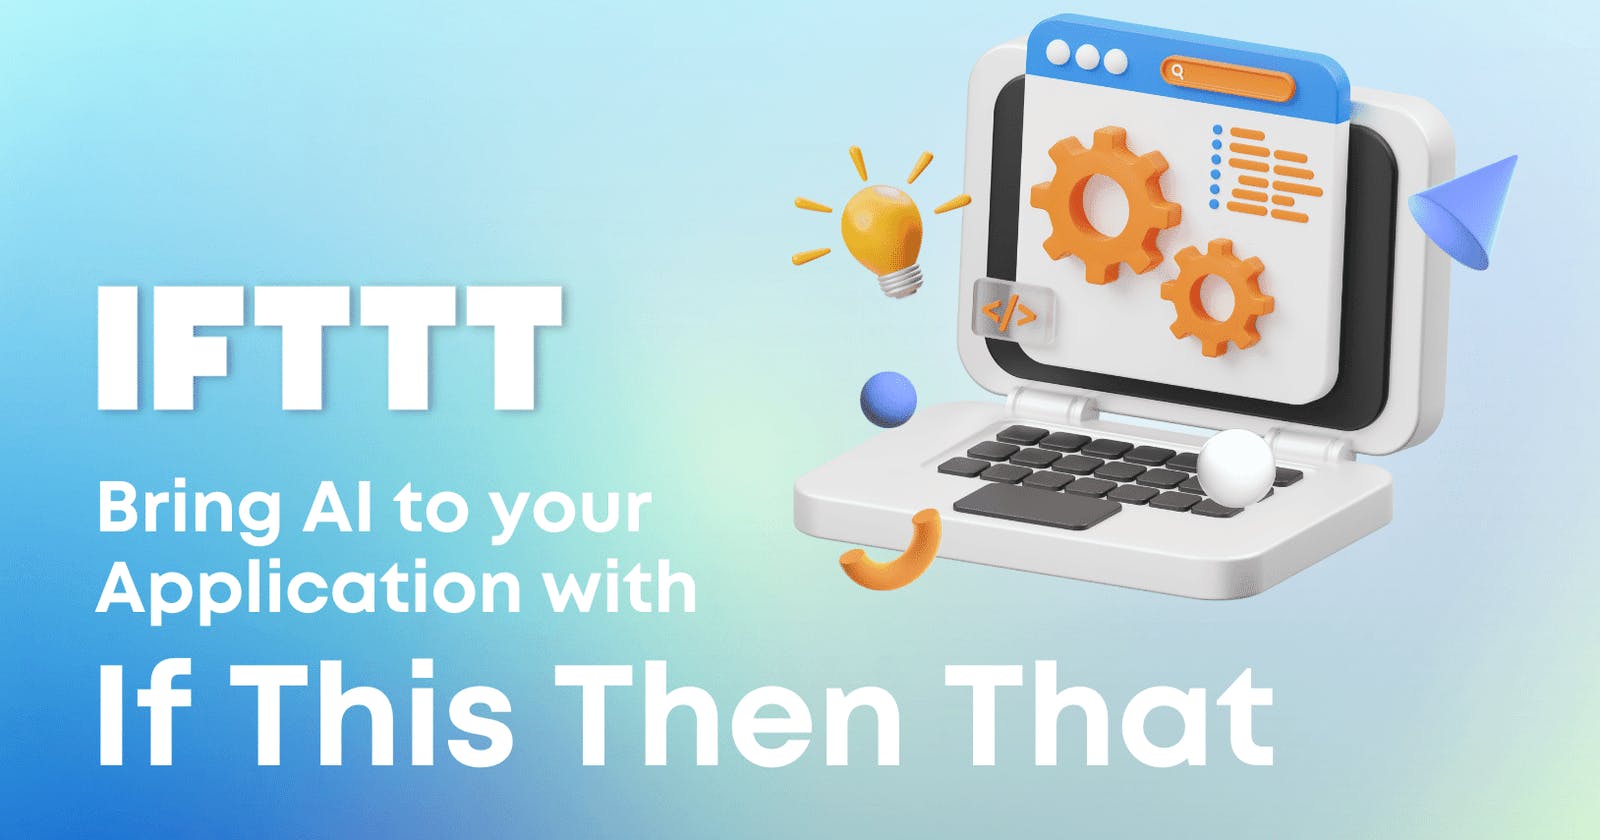 A Step-by-Step Guide to implementing AI in your App using IFTTT